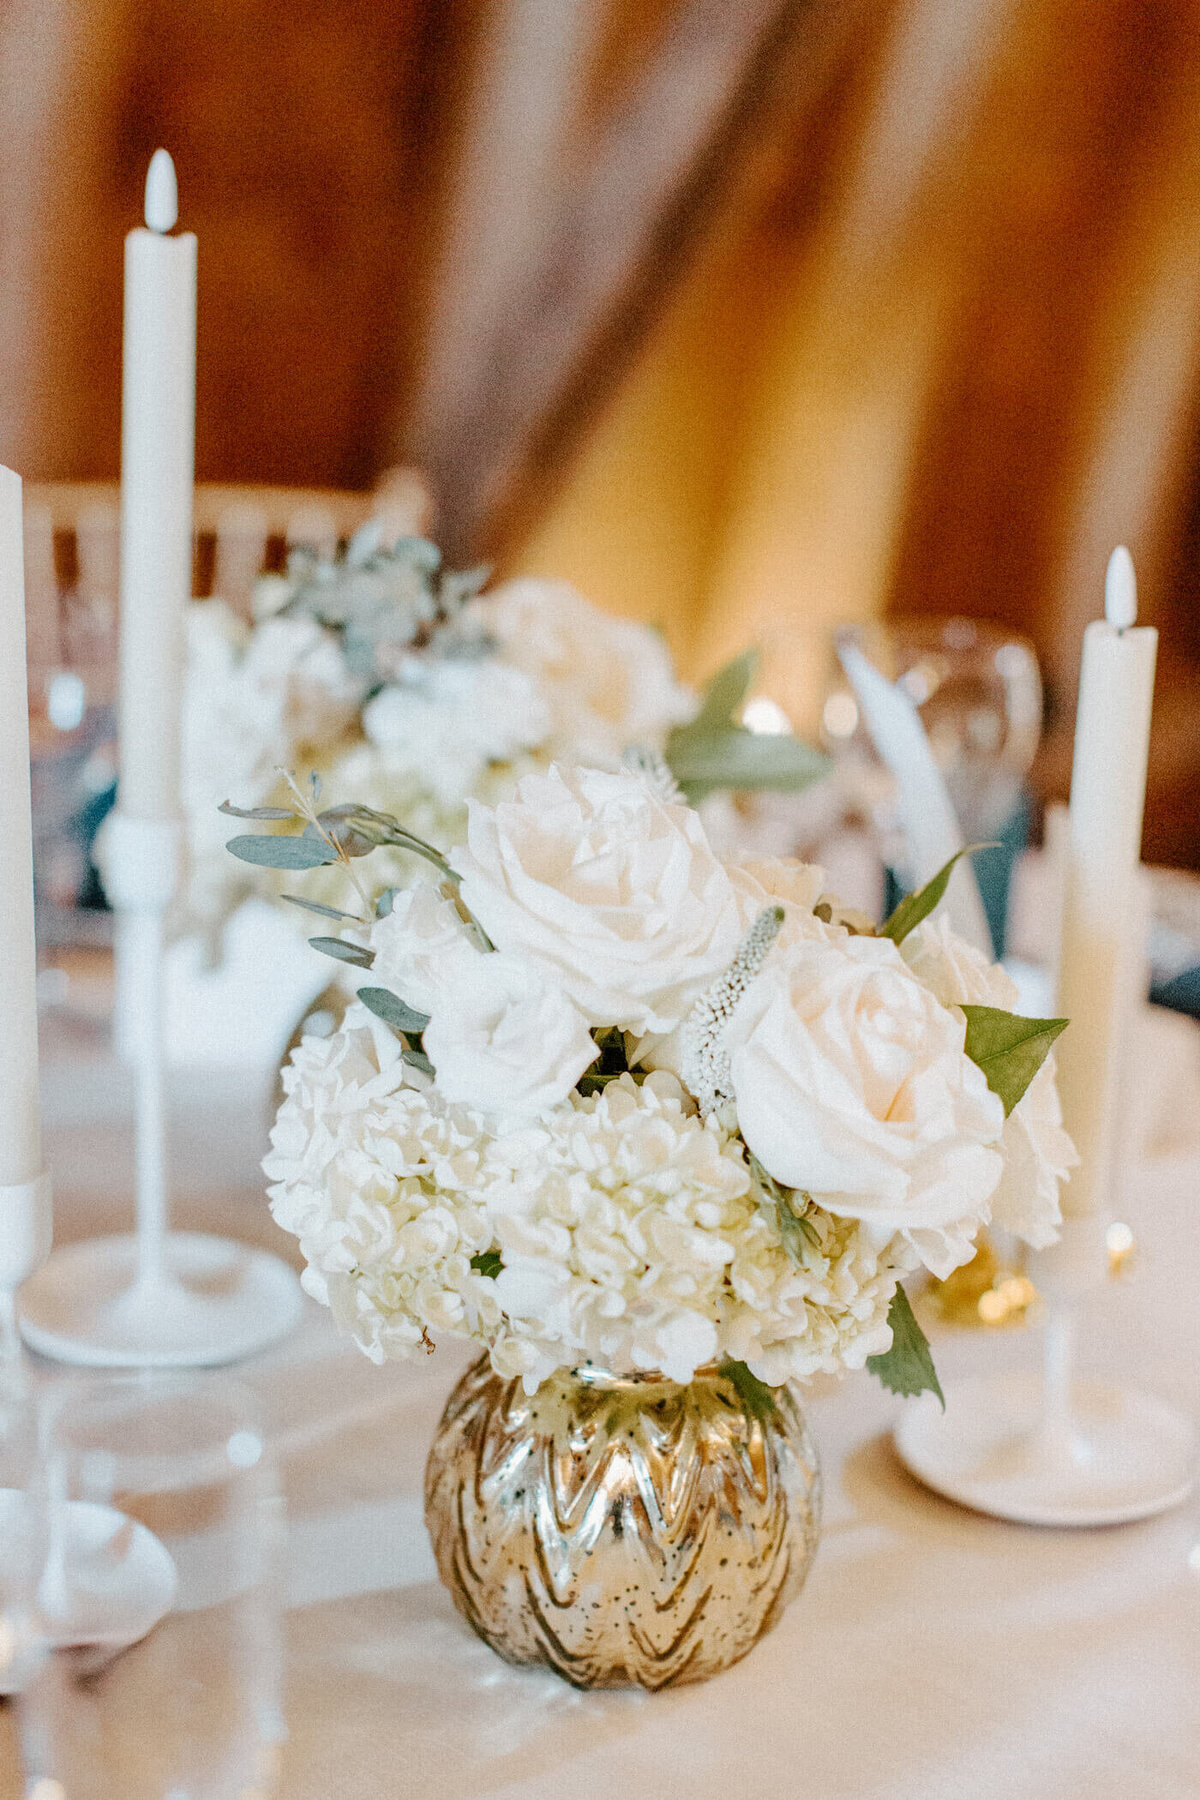 Wedding table setting with flowers and candles.